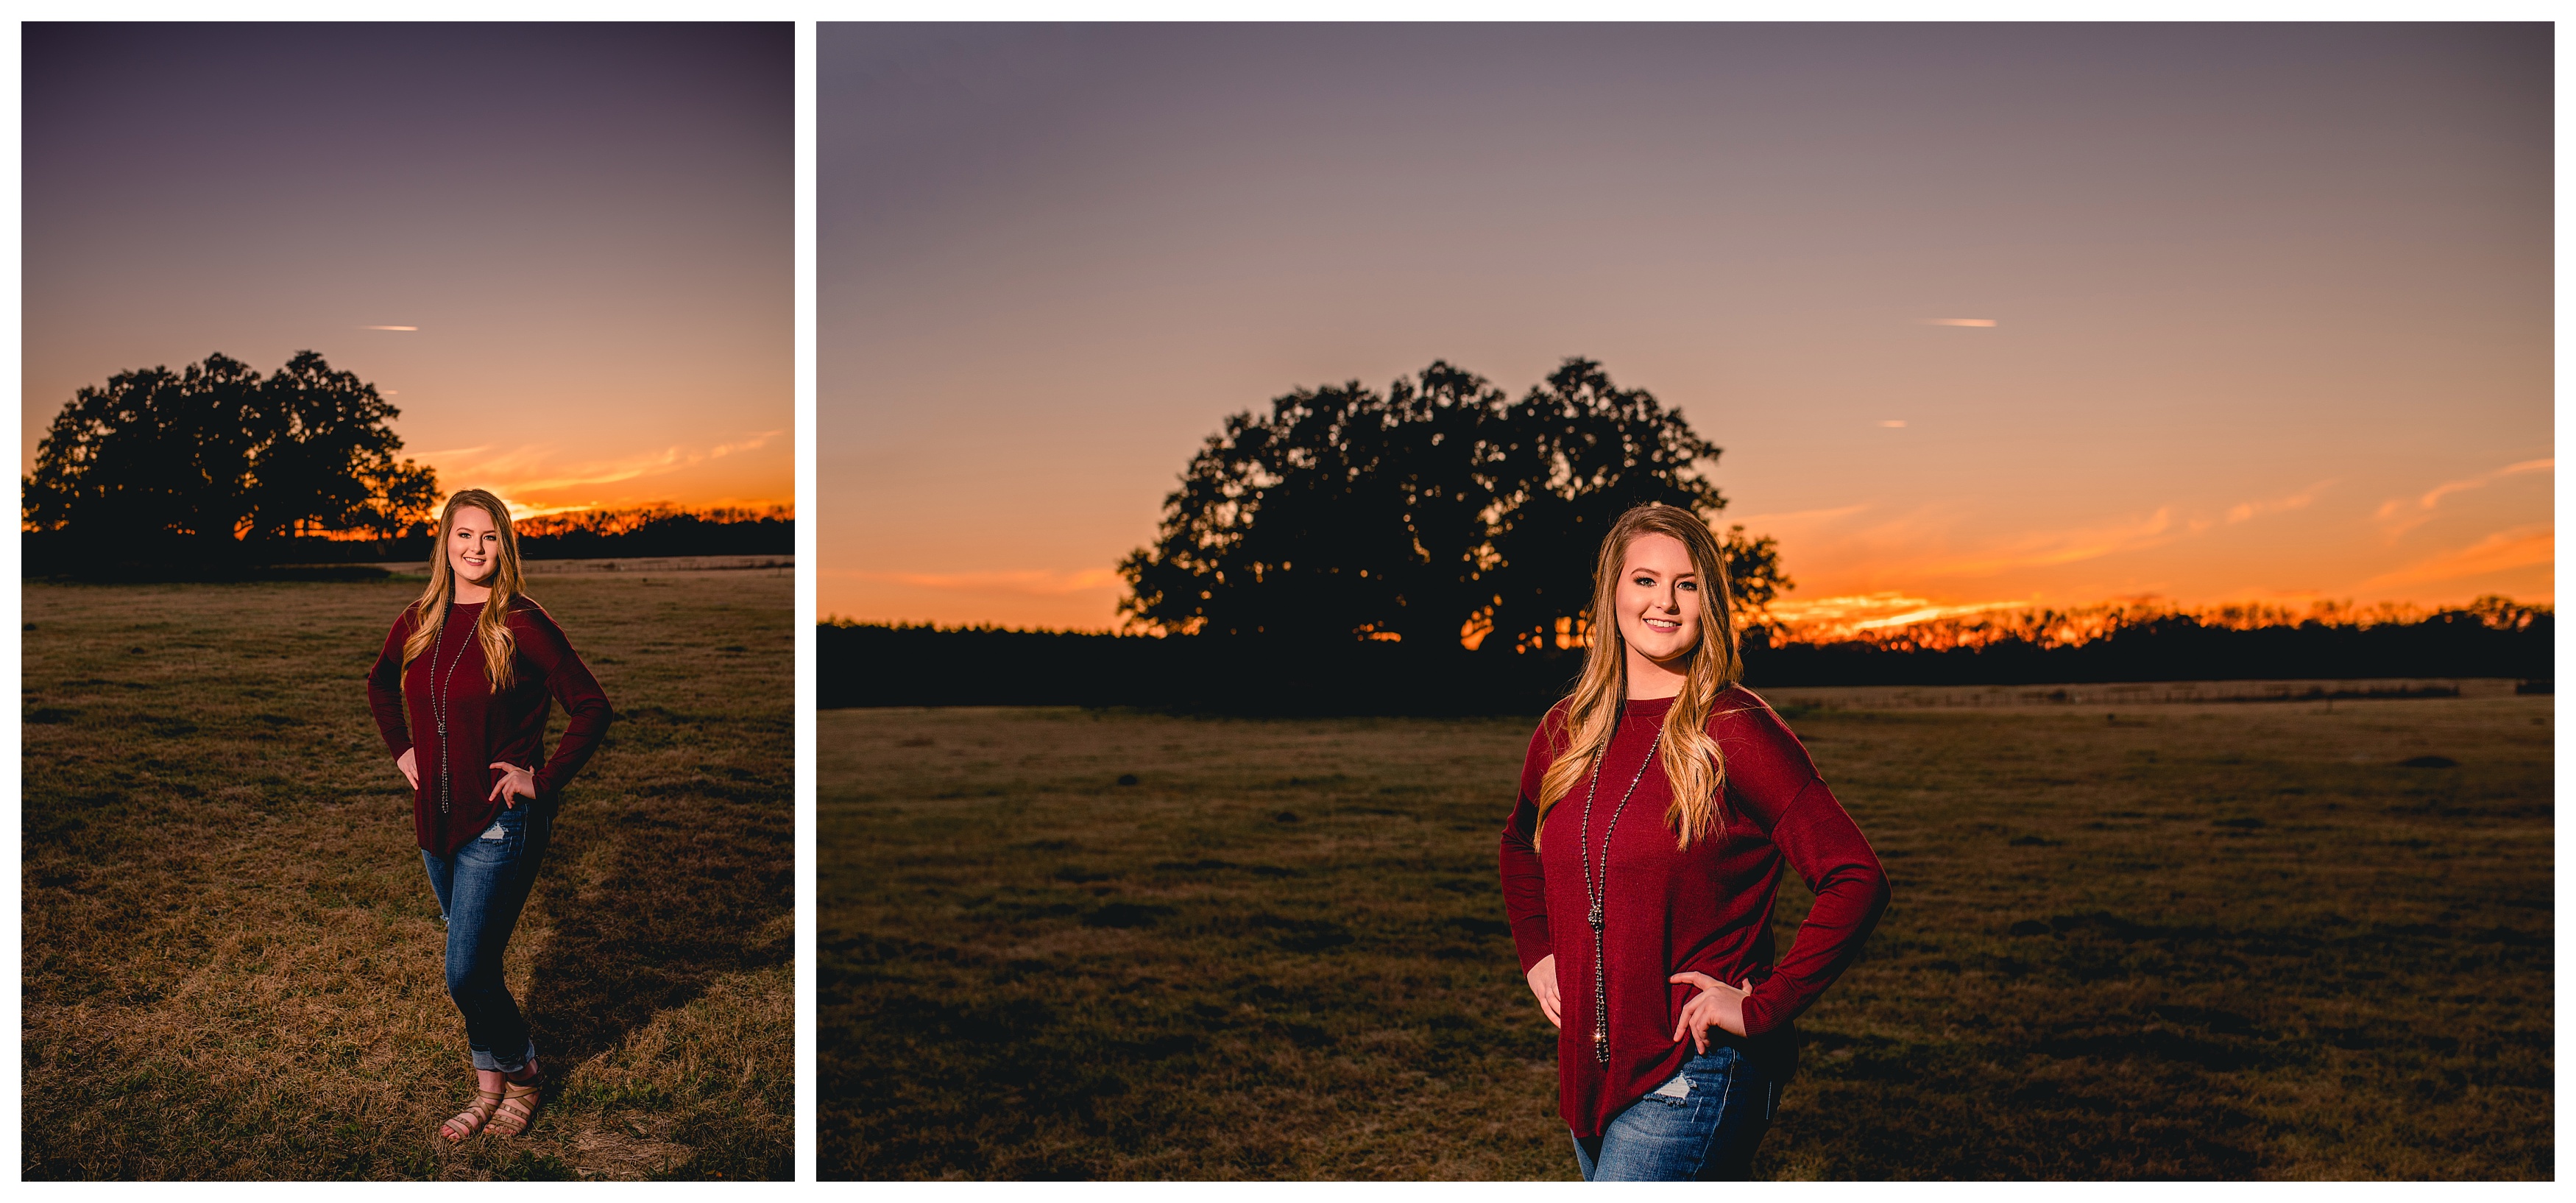 Senior photos taken at sunset with off camera flash to intensify the colorful sunset. Shelly Williams Photography